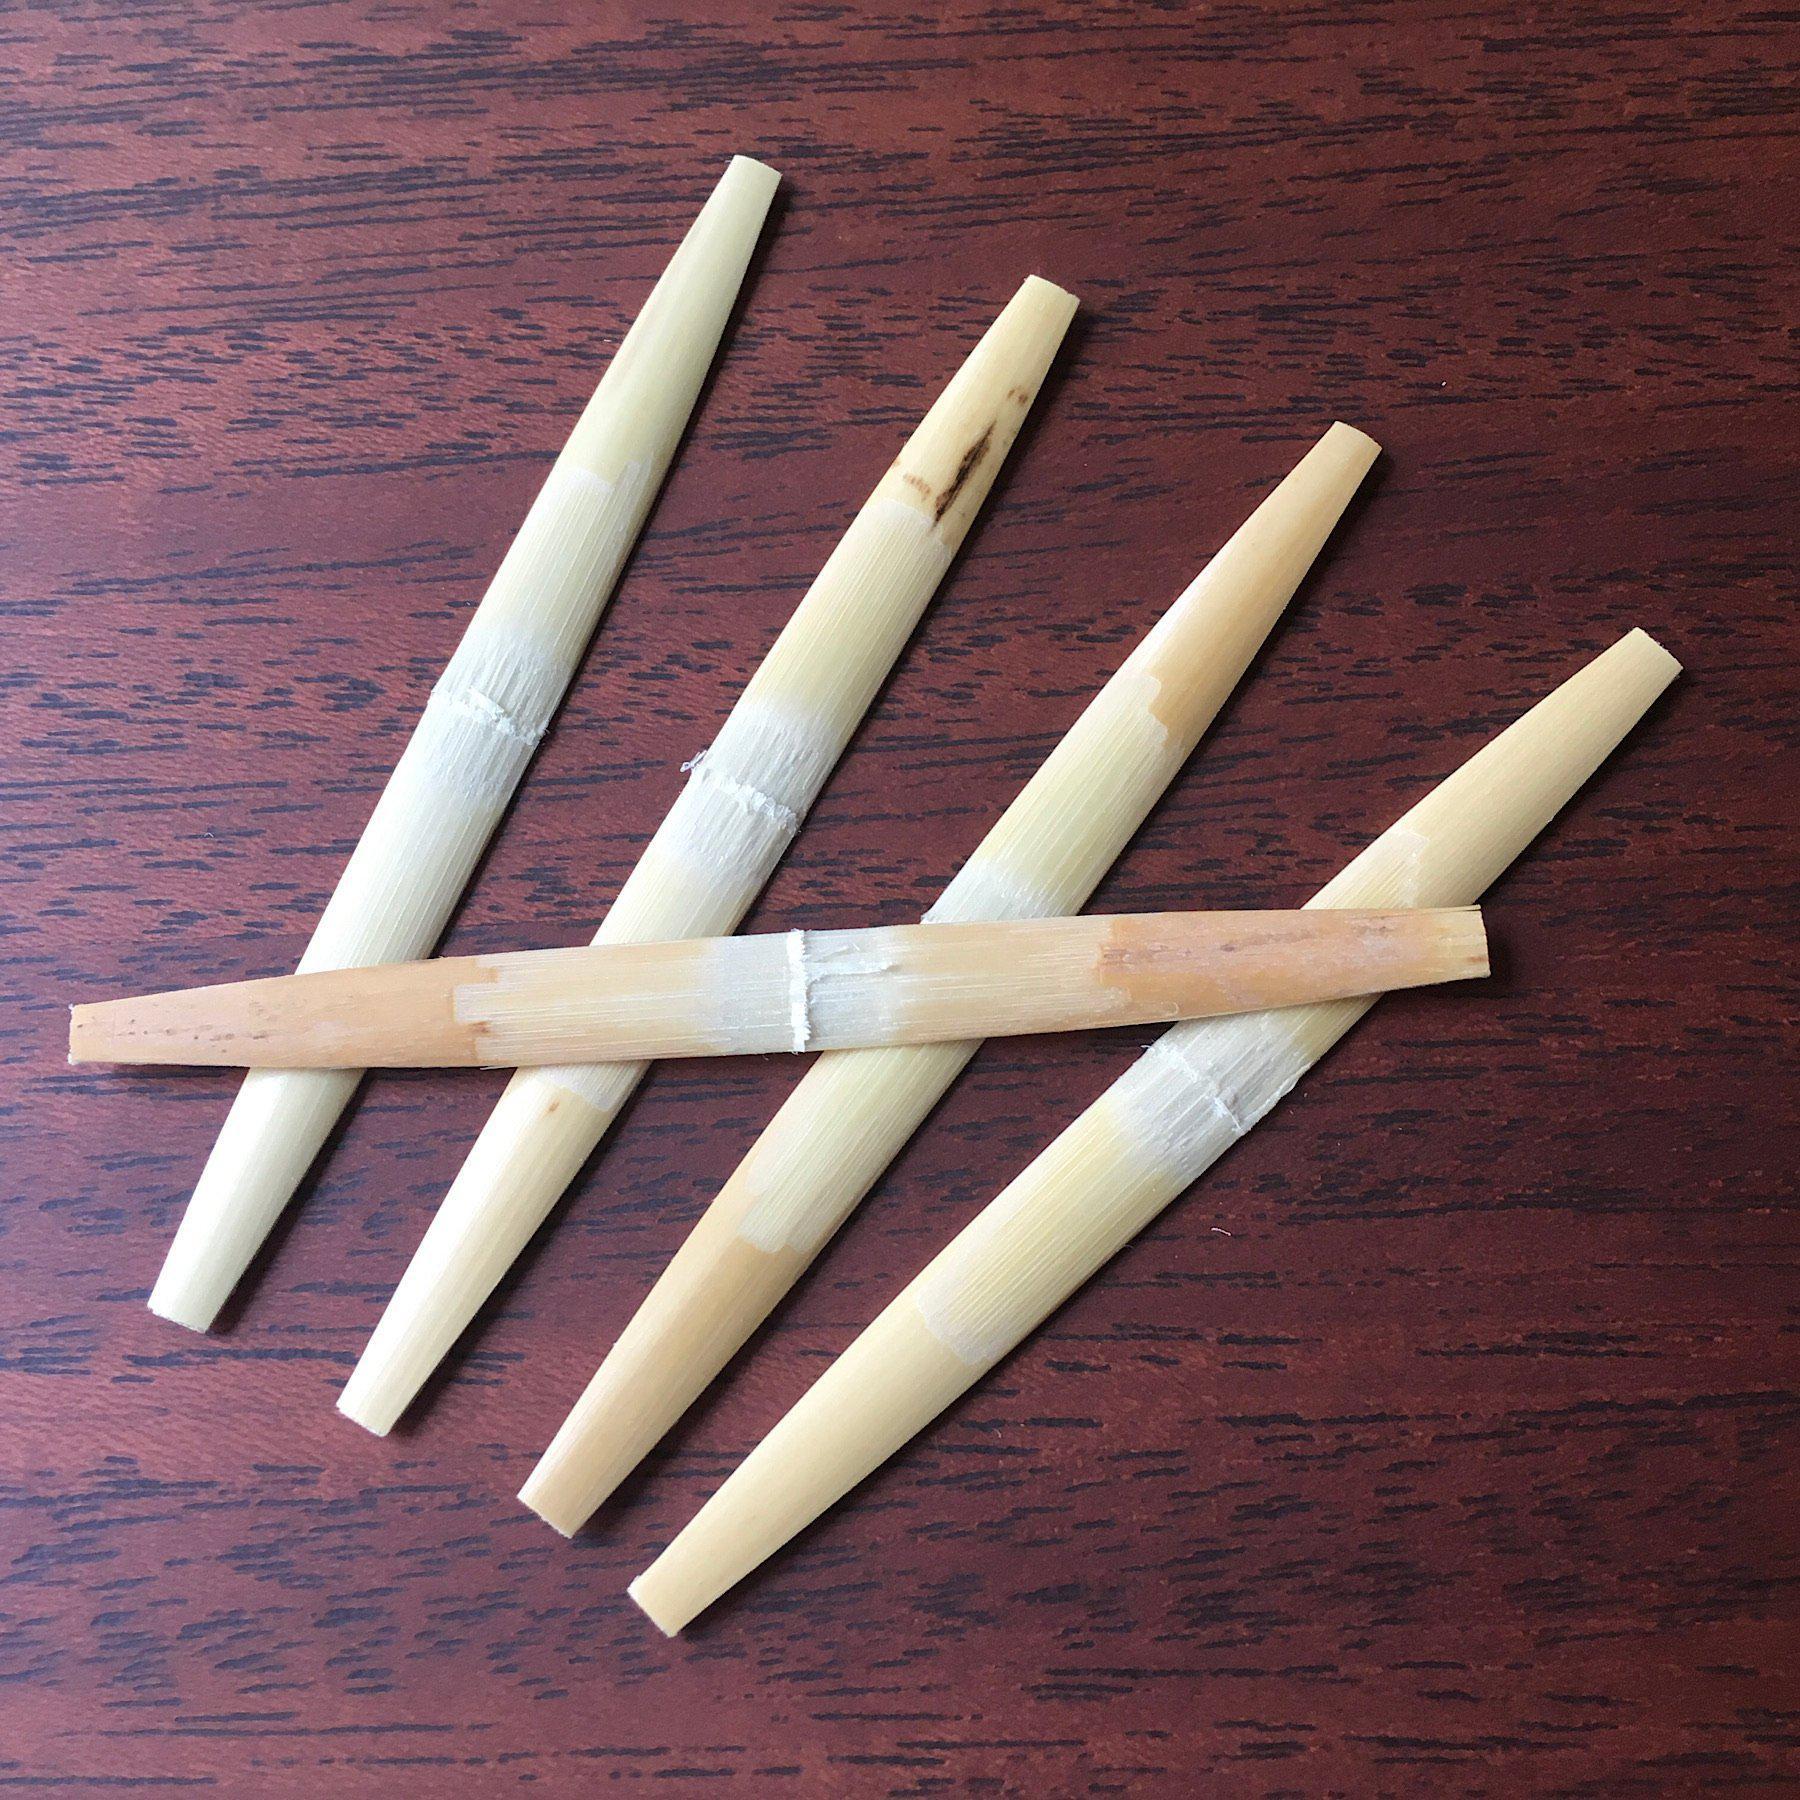 Profiled oboe cane, gouged, shaped, and folded, ready to be made into your best oboe reeds